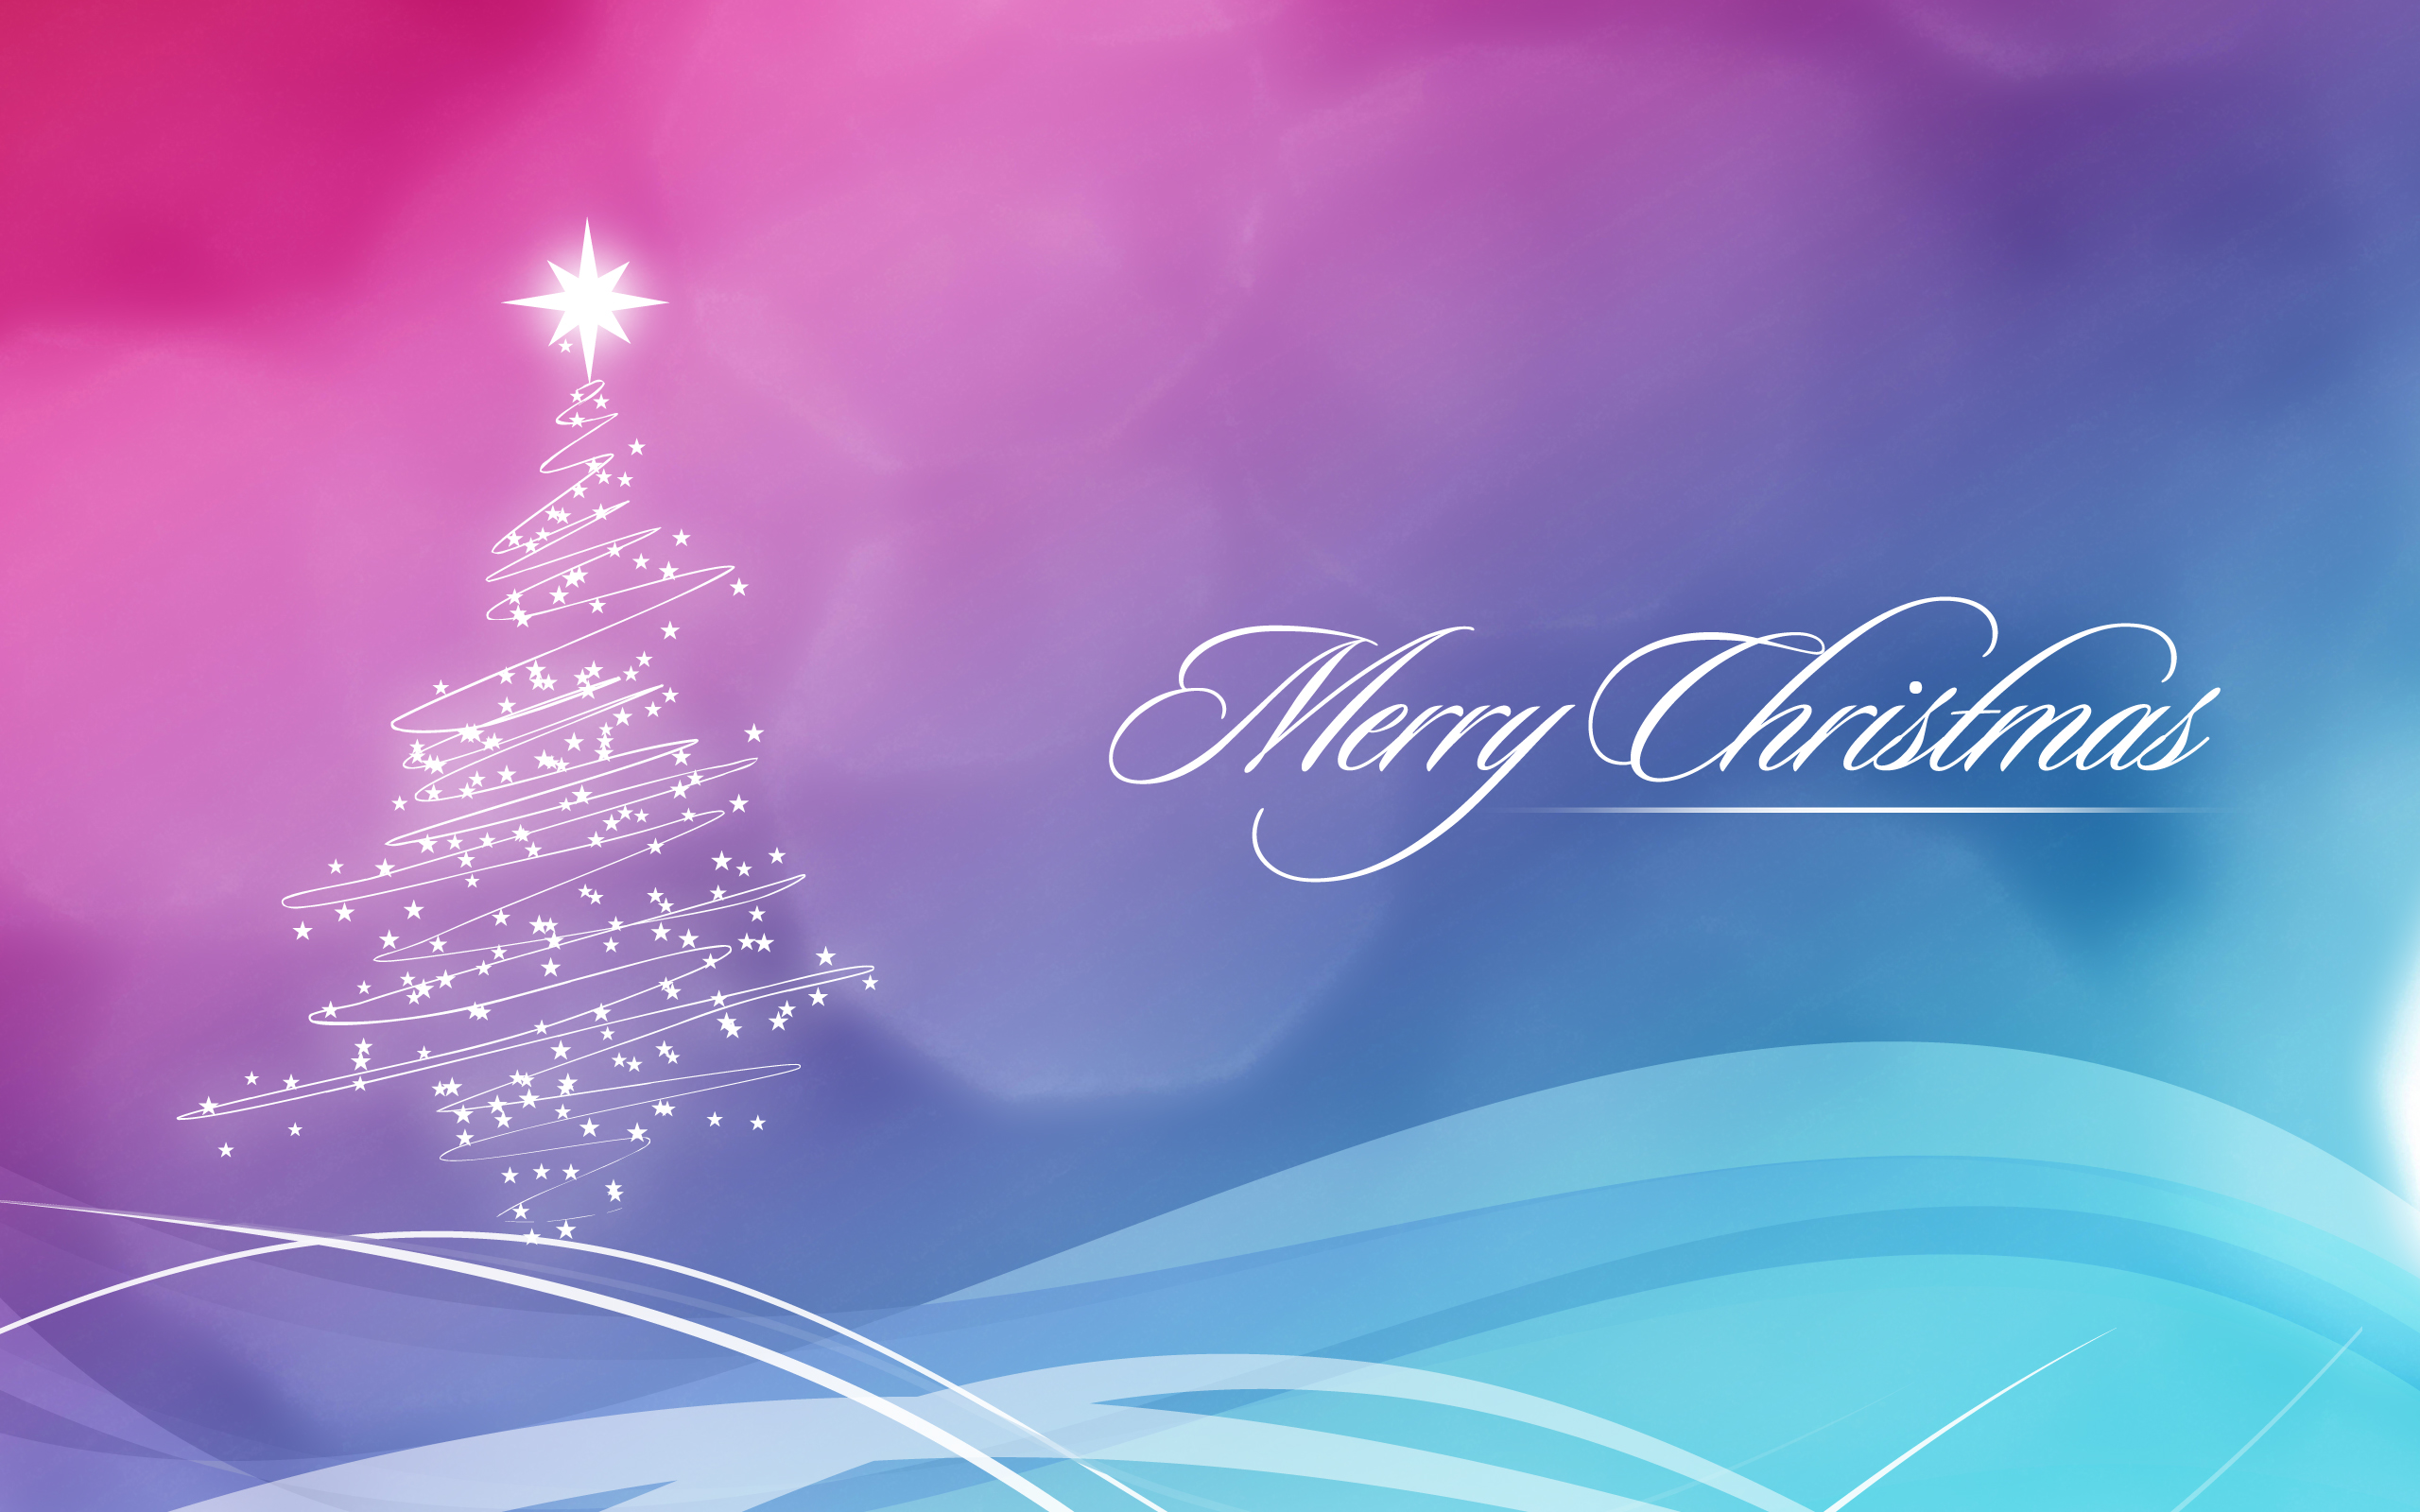 Merry Christmas Background Wallpaper Holidays